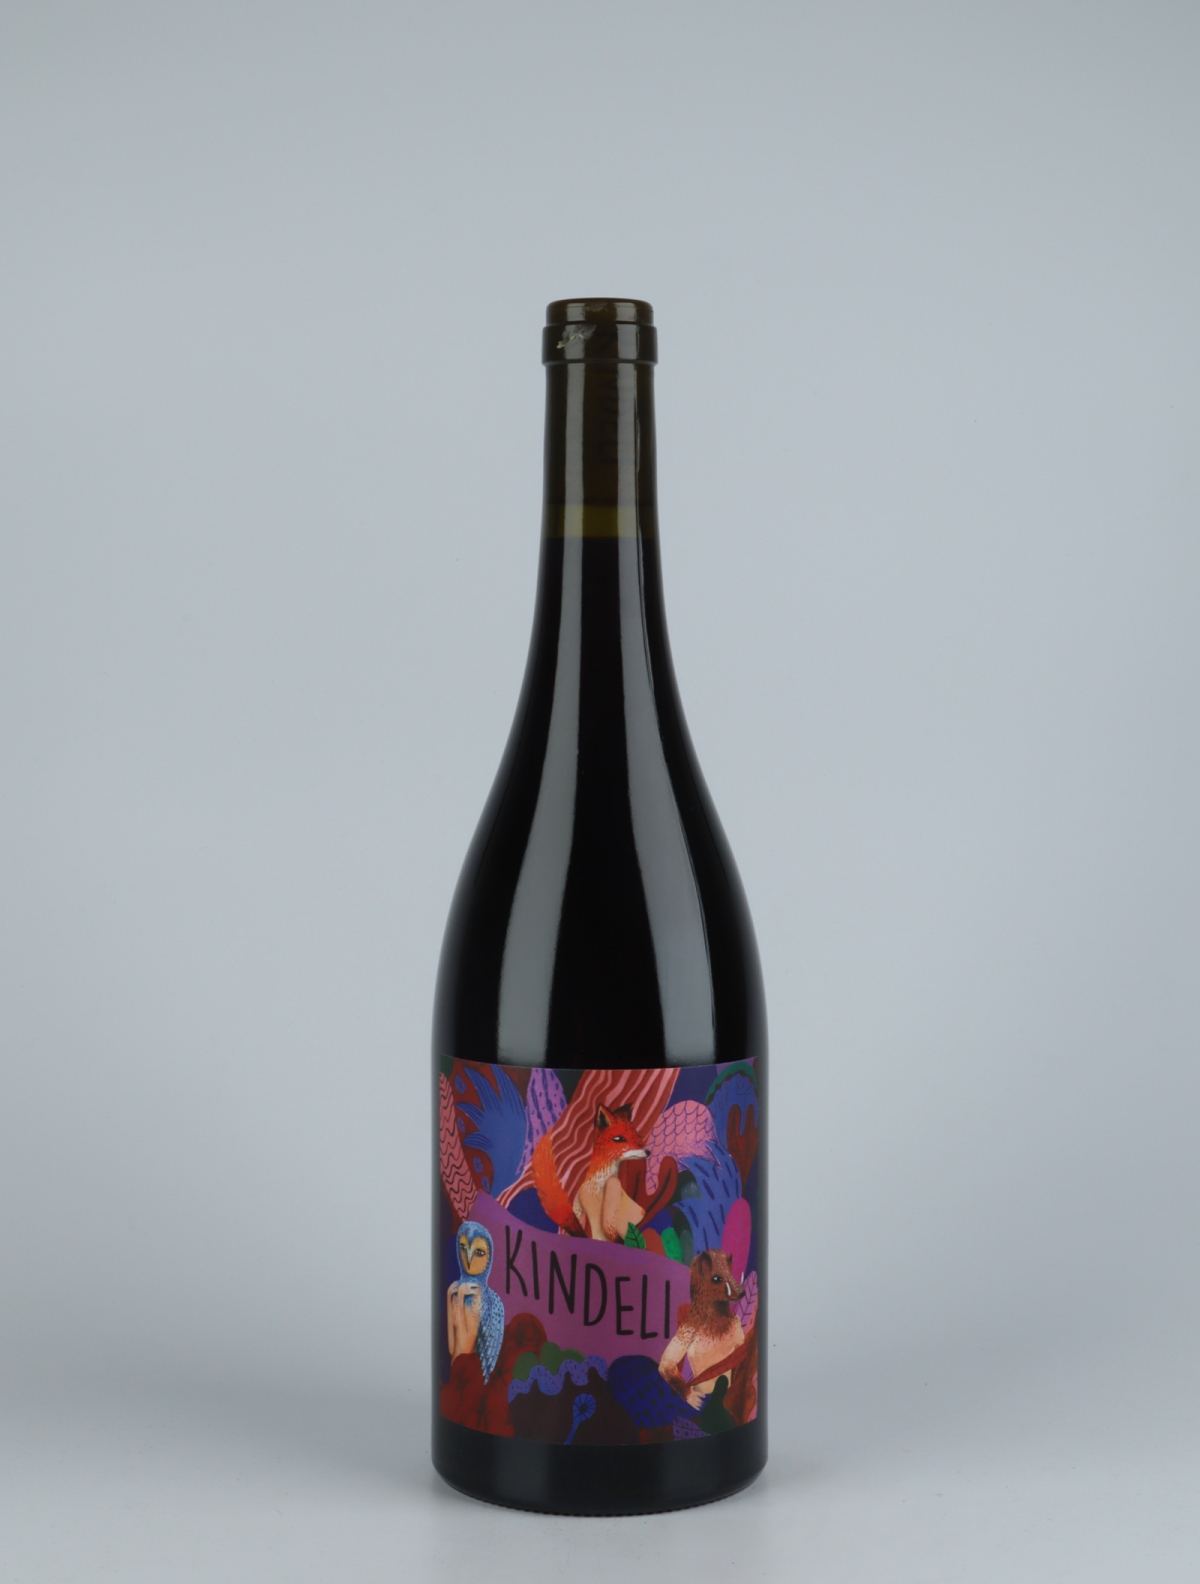 A bottle  Tinto Red wine from Kindeli, Nelson in New Zealand